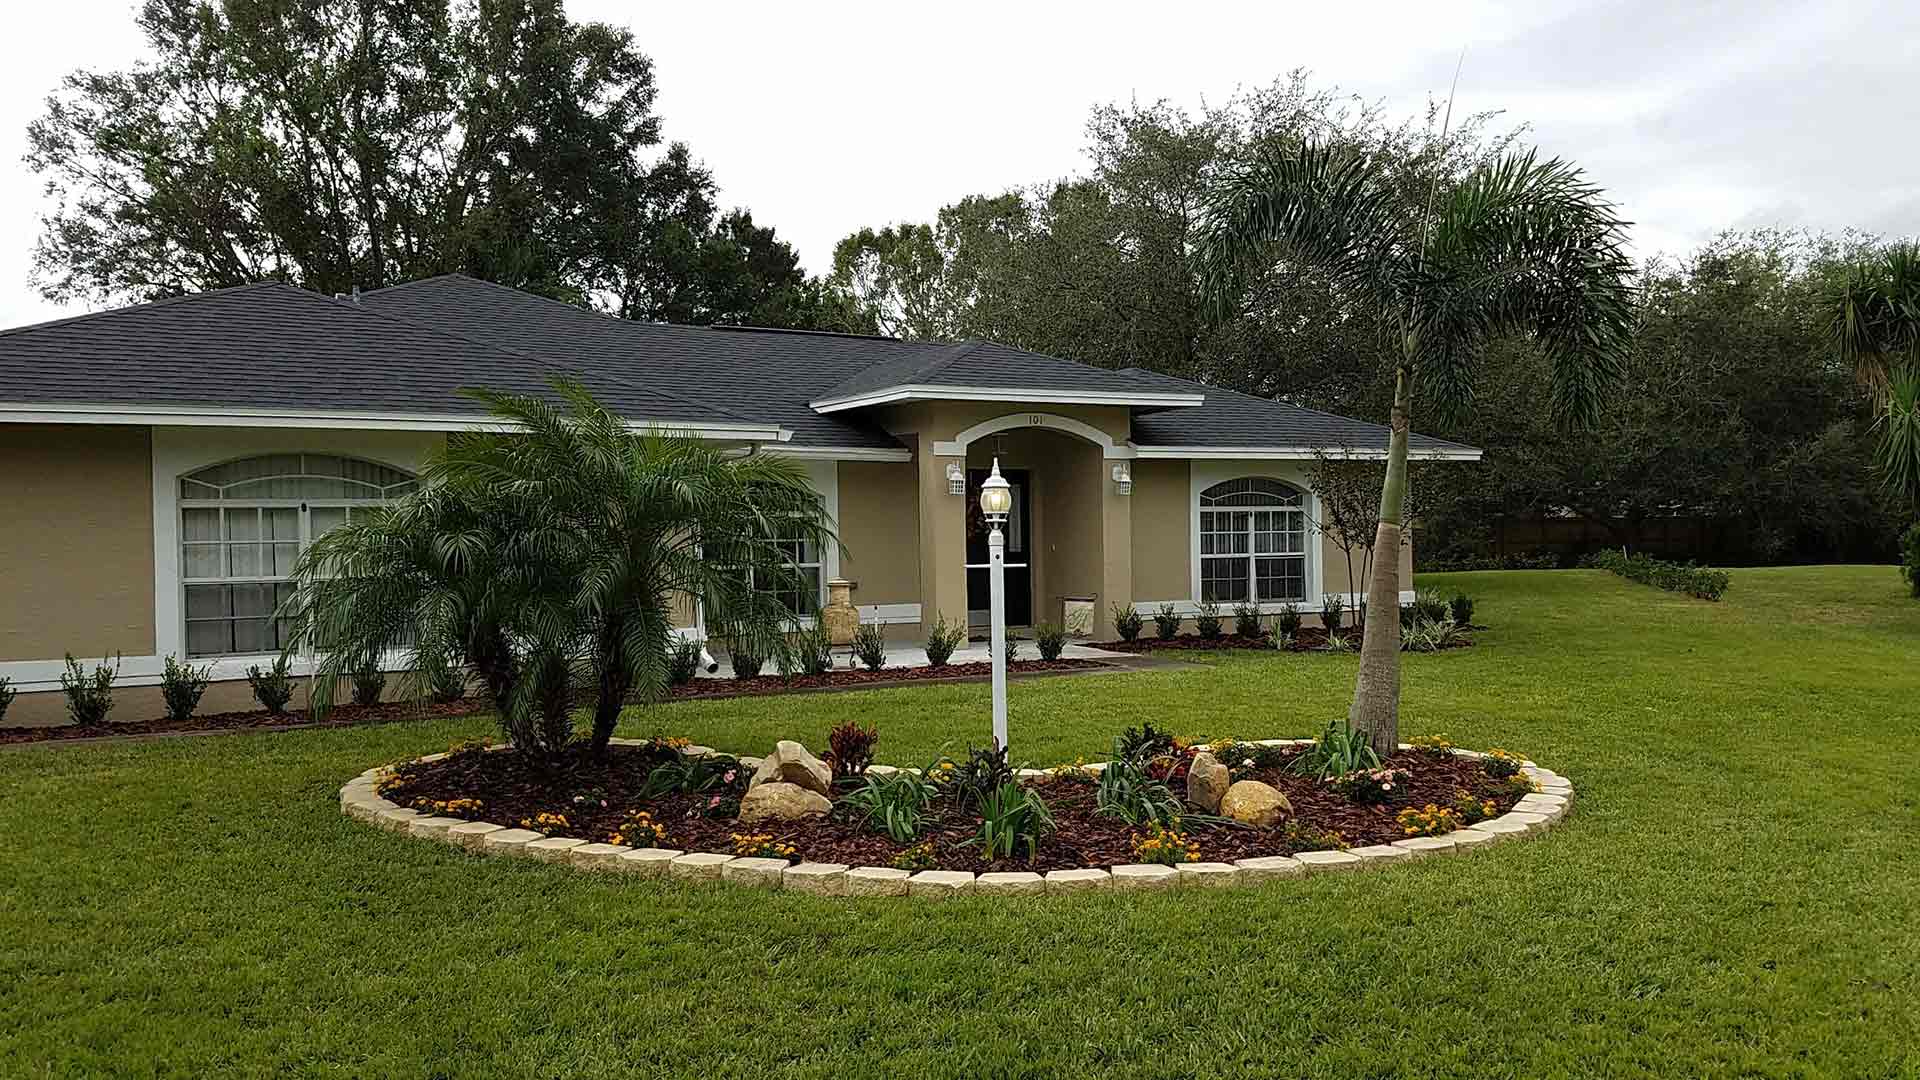 Beautifully cut front lawn in Lakeland, FL by Tropical Temptations Landscaping.